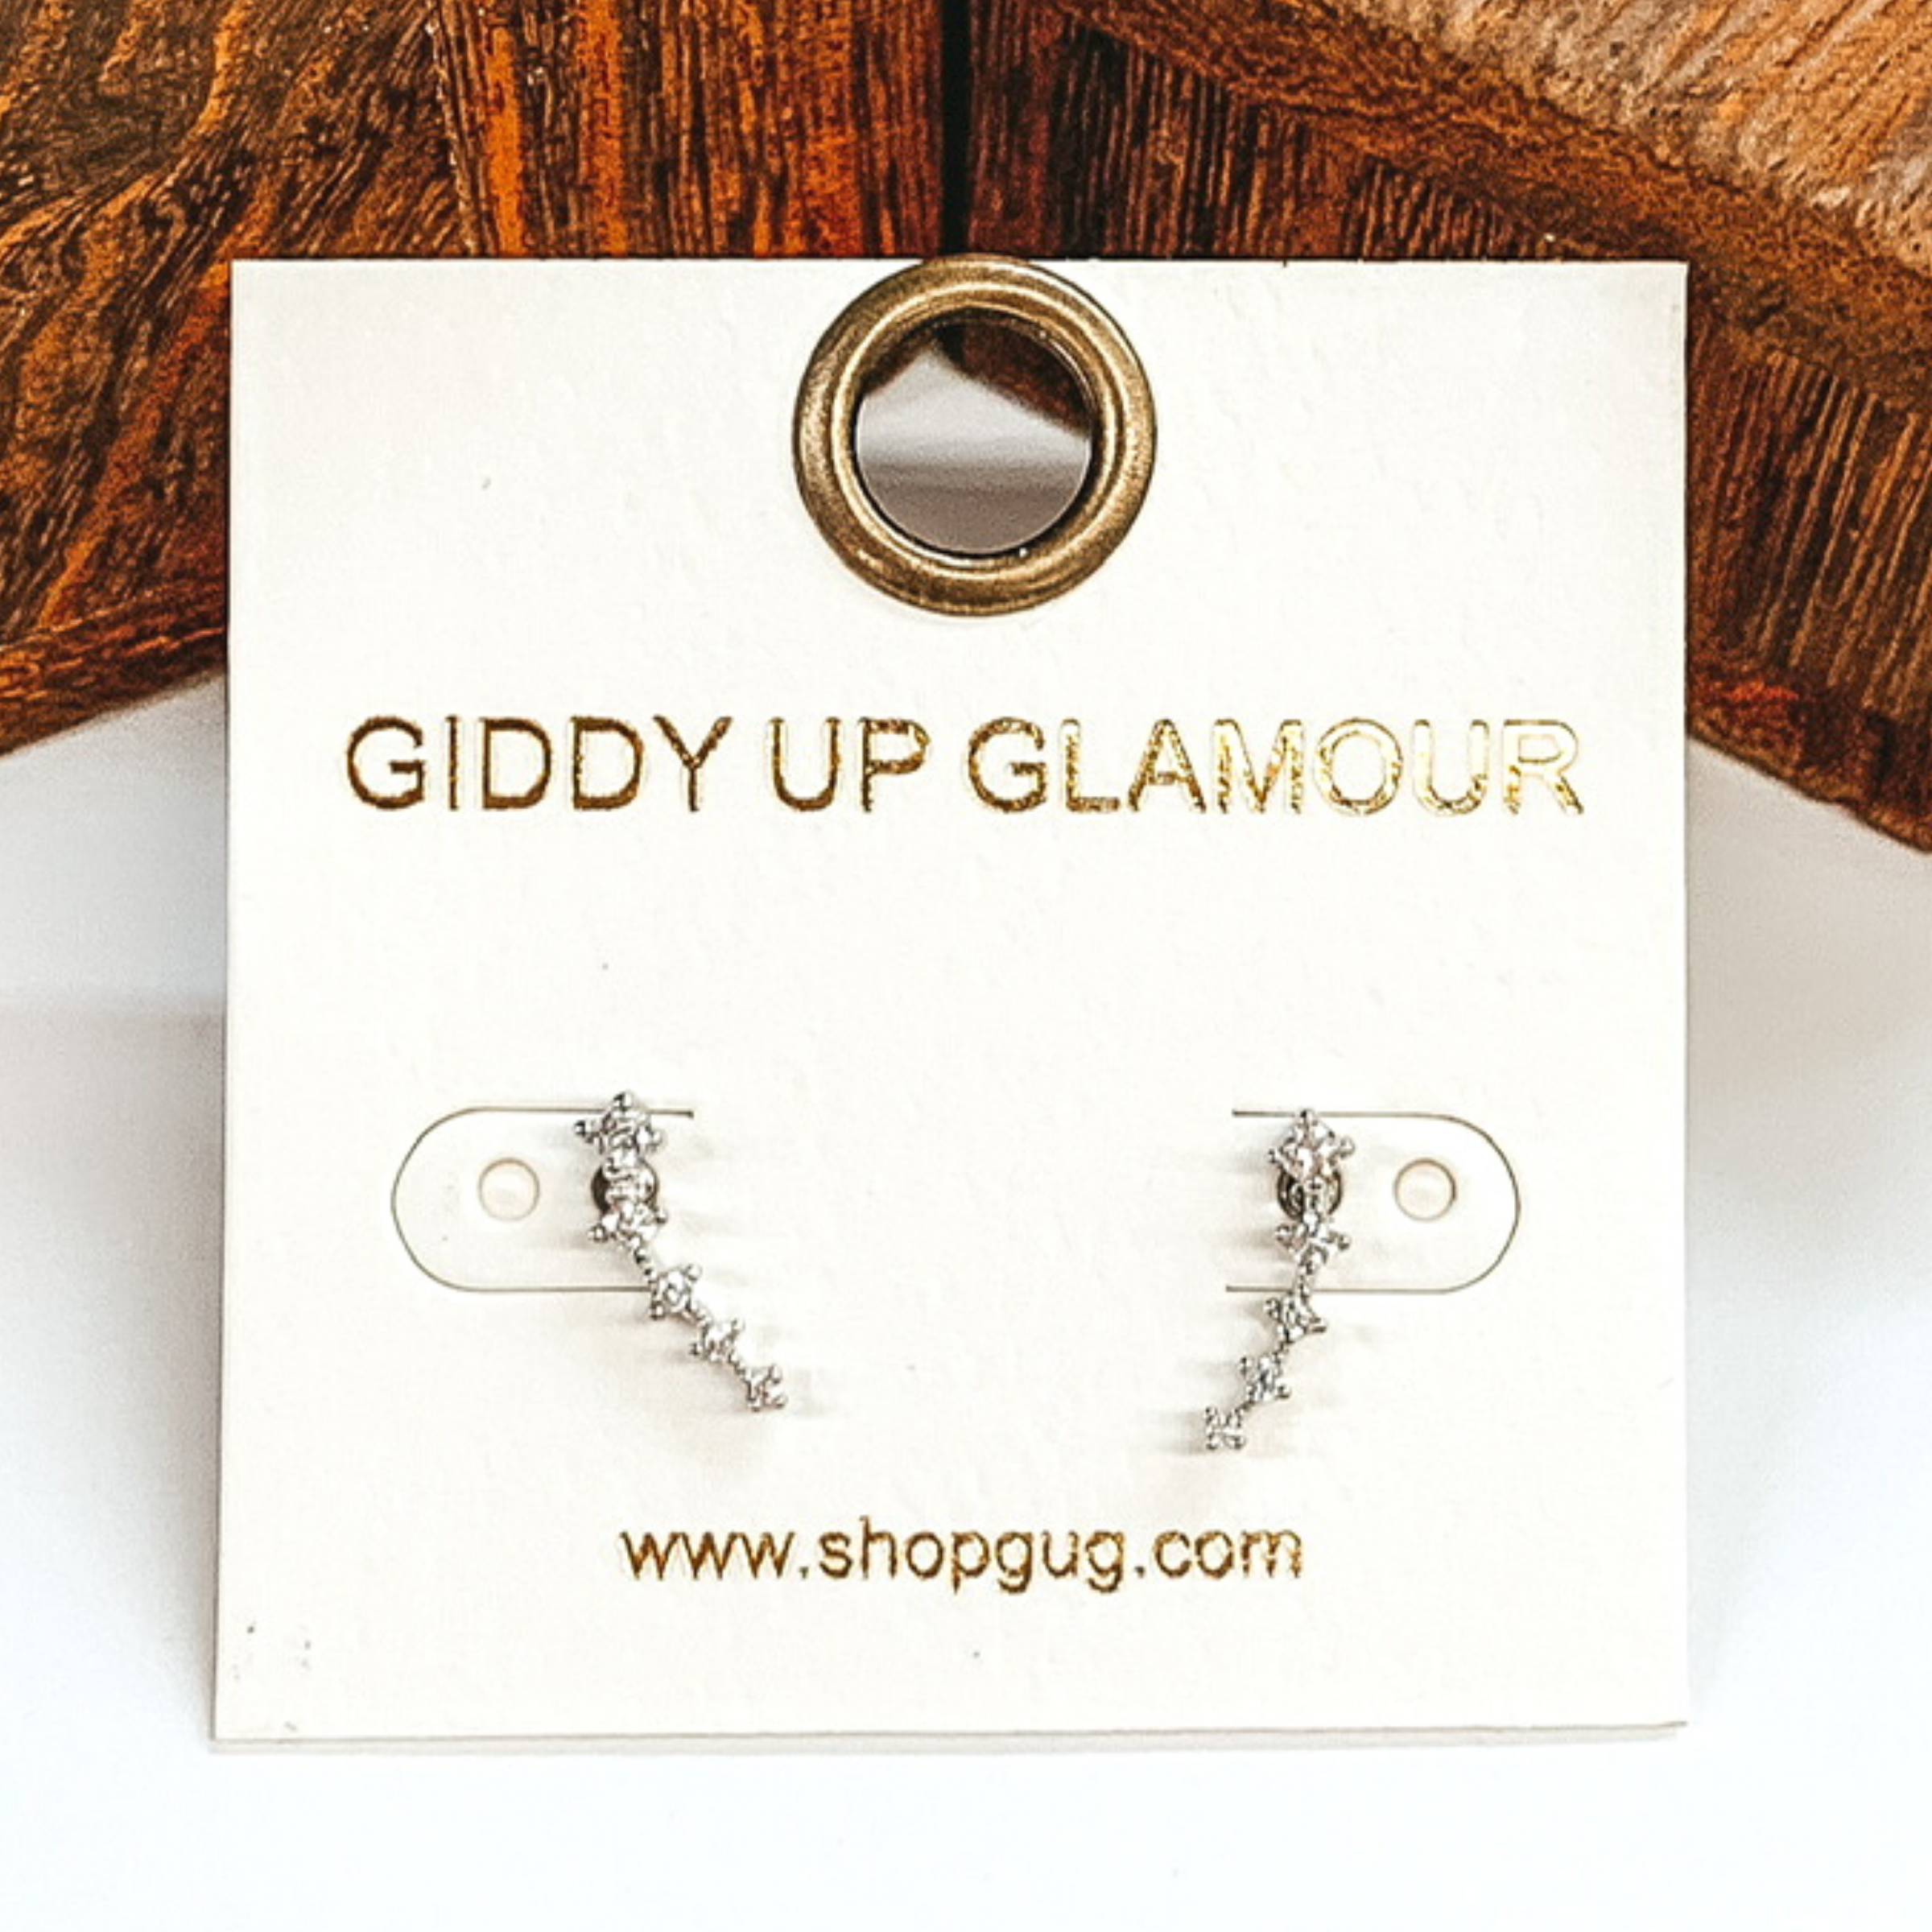 Silver and clear crystals ear climbing stud earrings. These earrings are pictured on a white and brown background. 